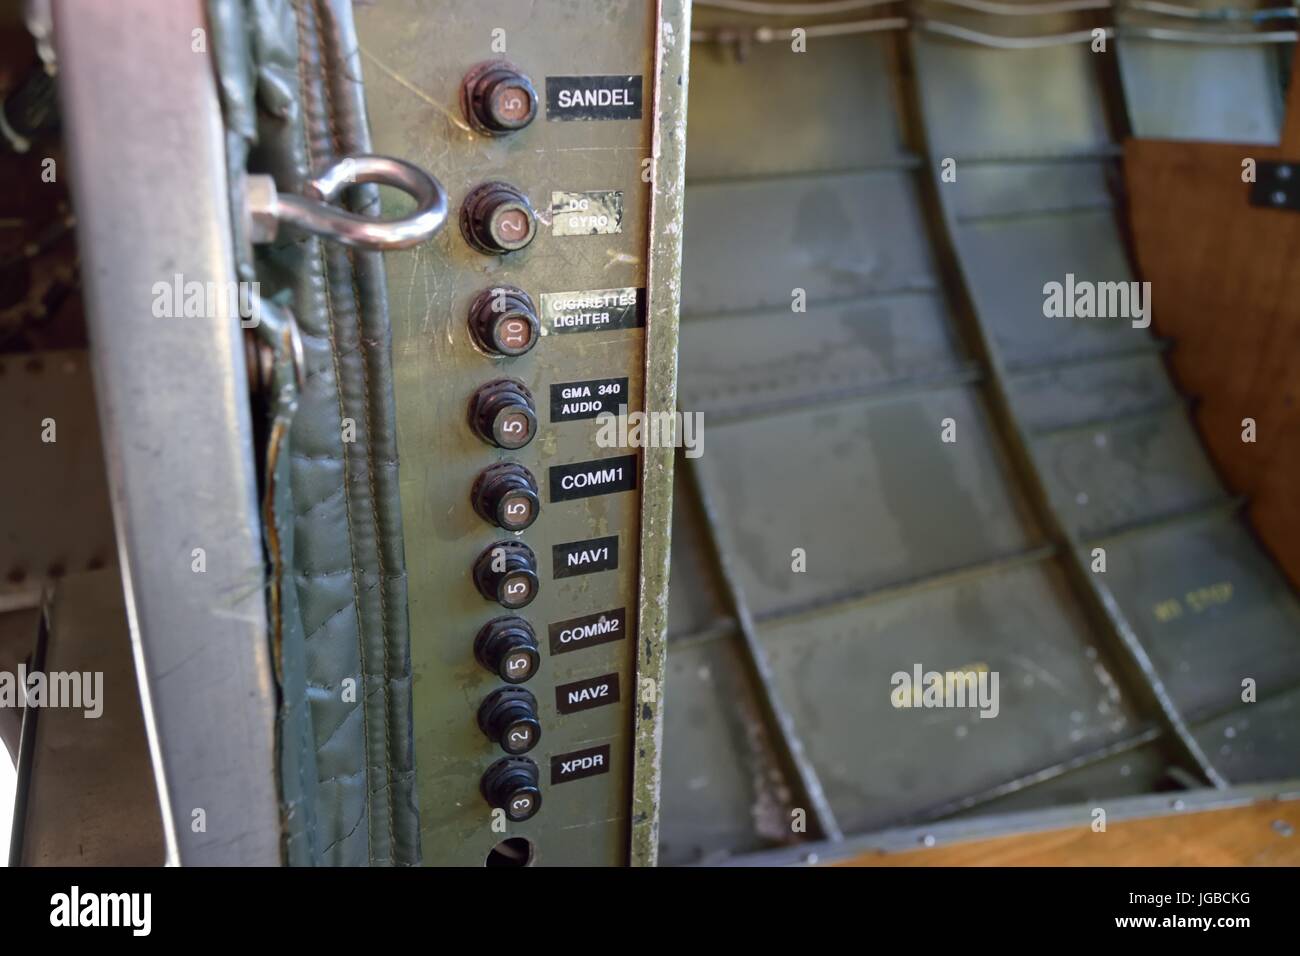 Interior of a Boeing B17 Stock Photo